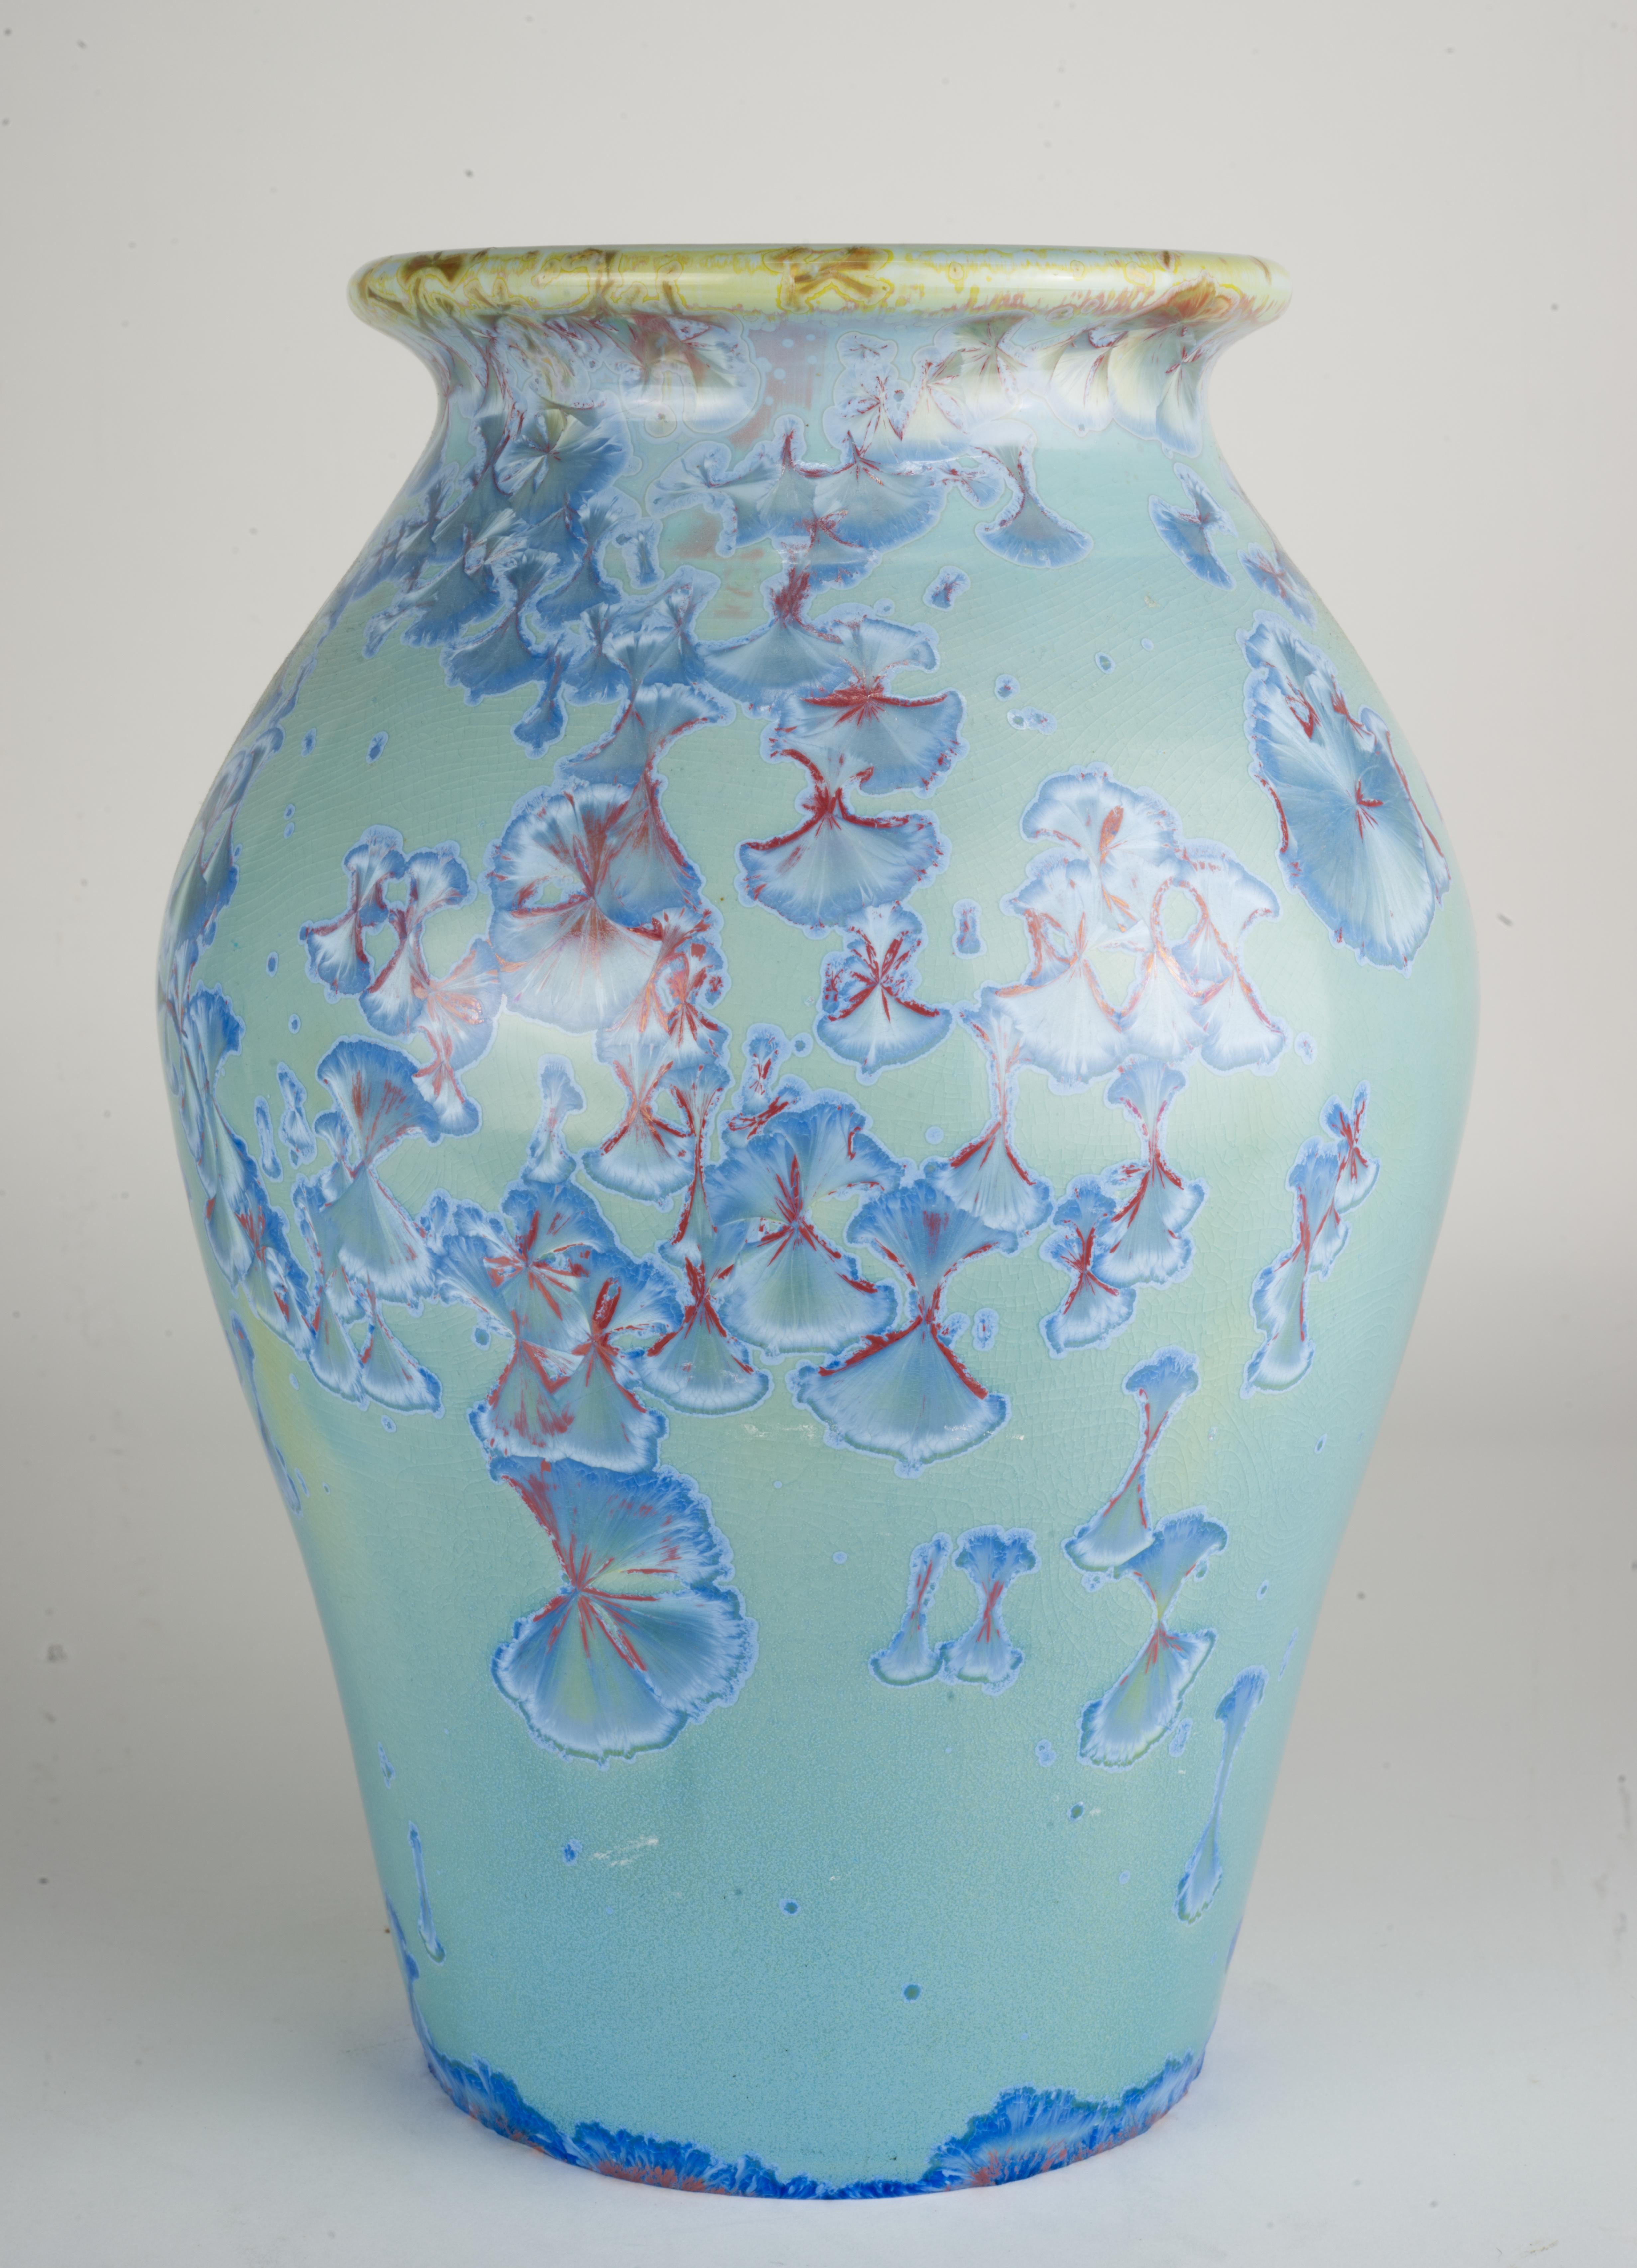  Rare, sculptural vase was made of pure, high-fire porcelain and glazed both on the inside and the outside. Blue and pink highly detailed crystals on crackled blue background were grown in a kiln during a very long, controlled firing. Each